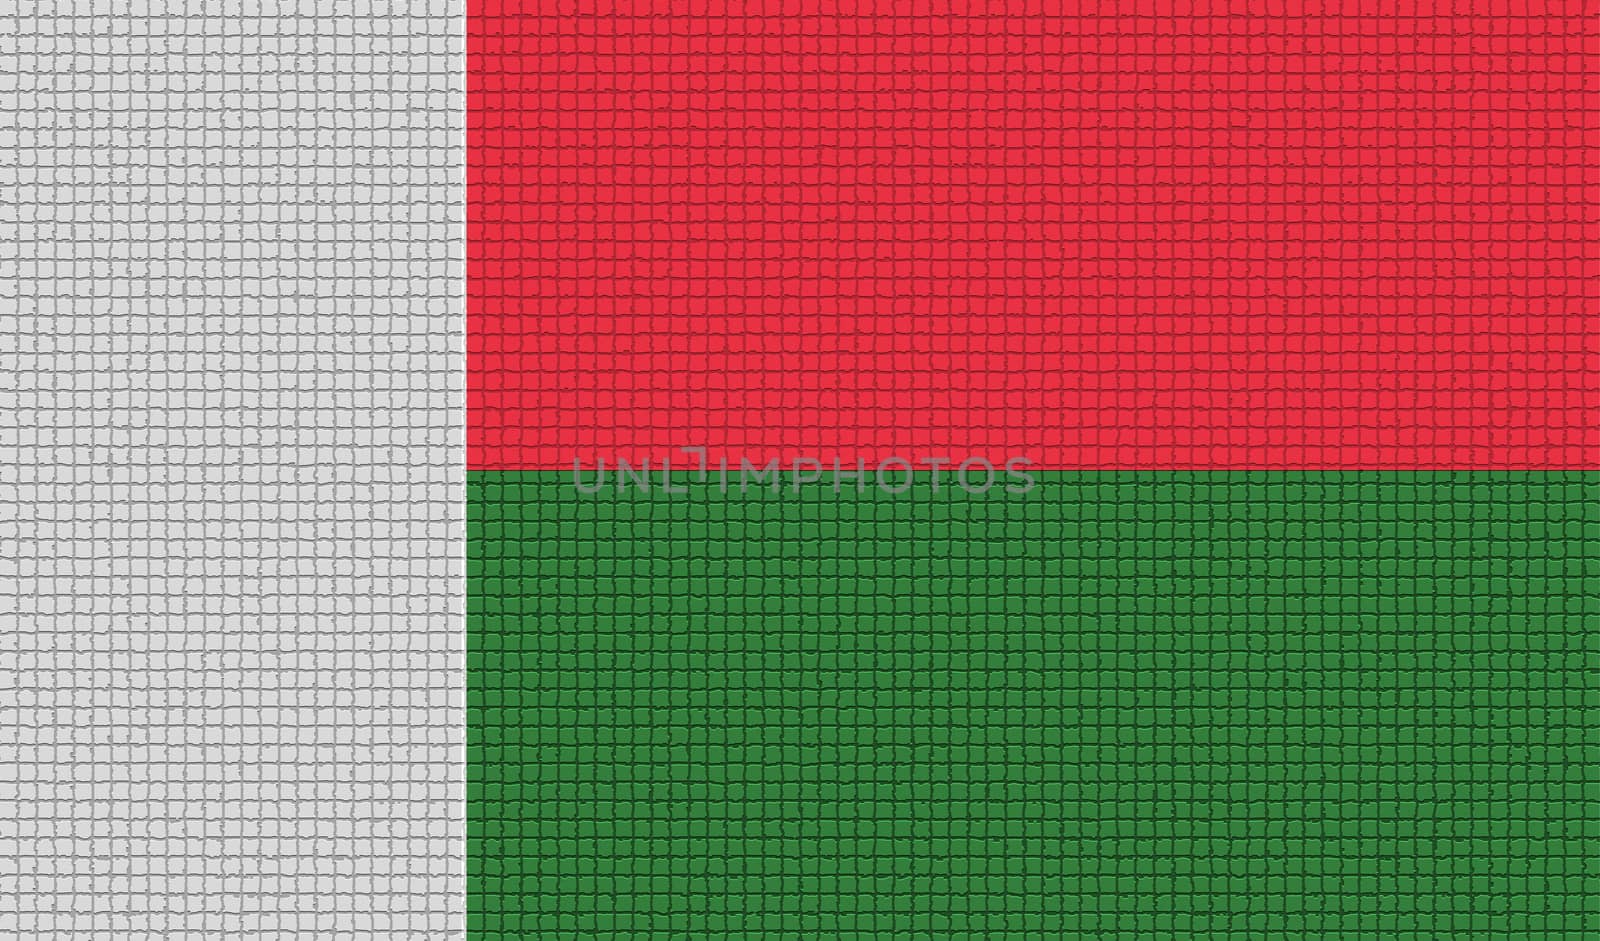 Flags of Madagascar with abstract textures. Rasterized version